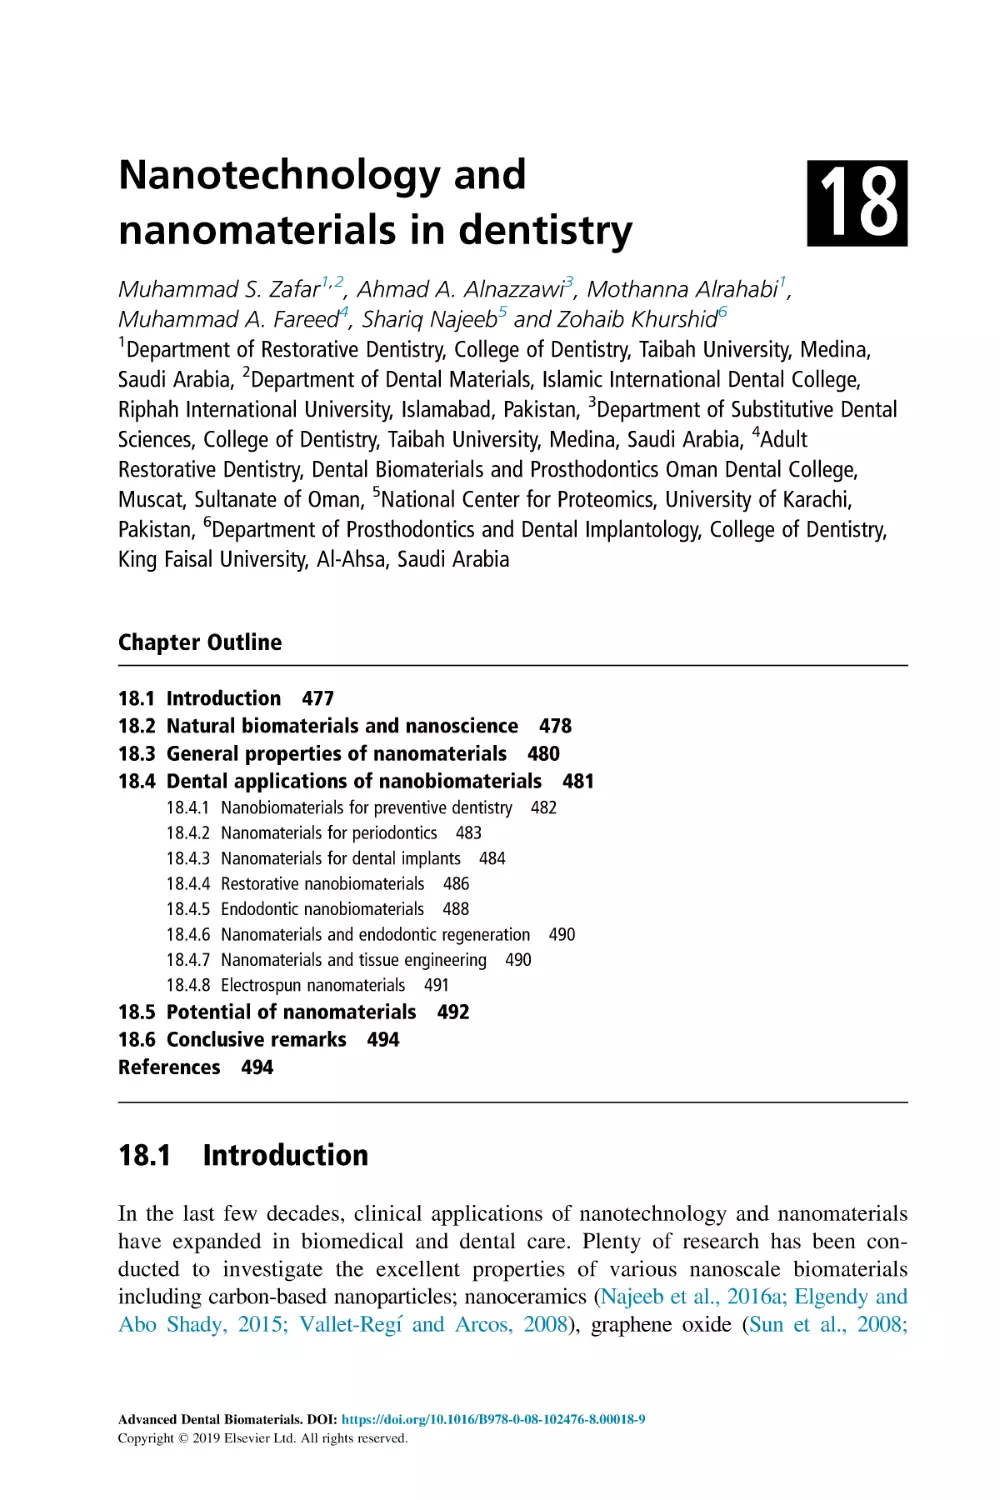 18 Nanotechnology and nanomaterials in dentistry
Chapter Outline
18.1 Introduction